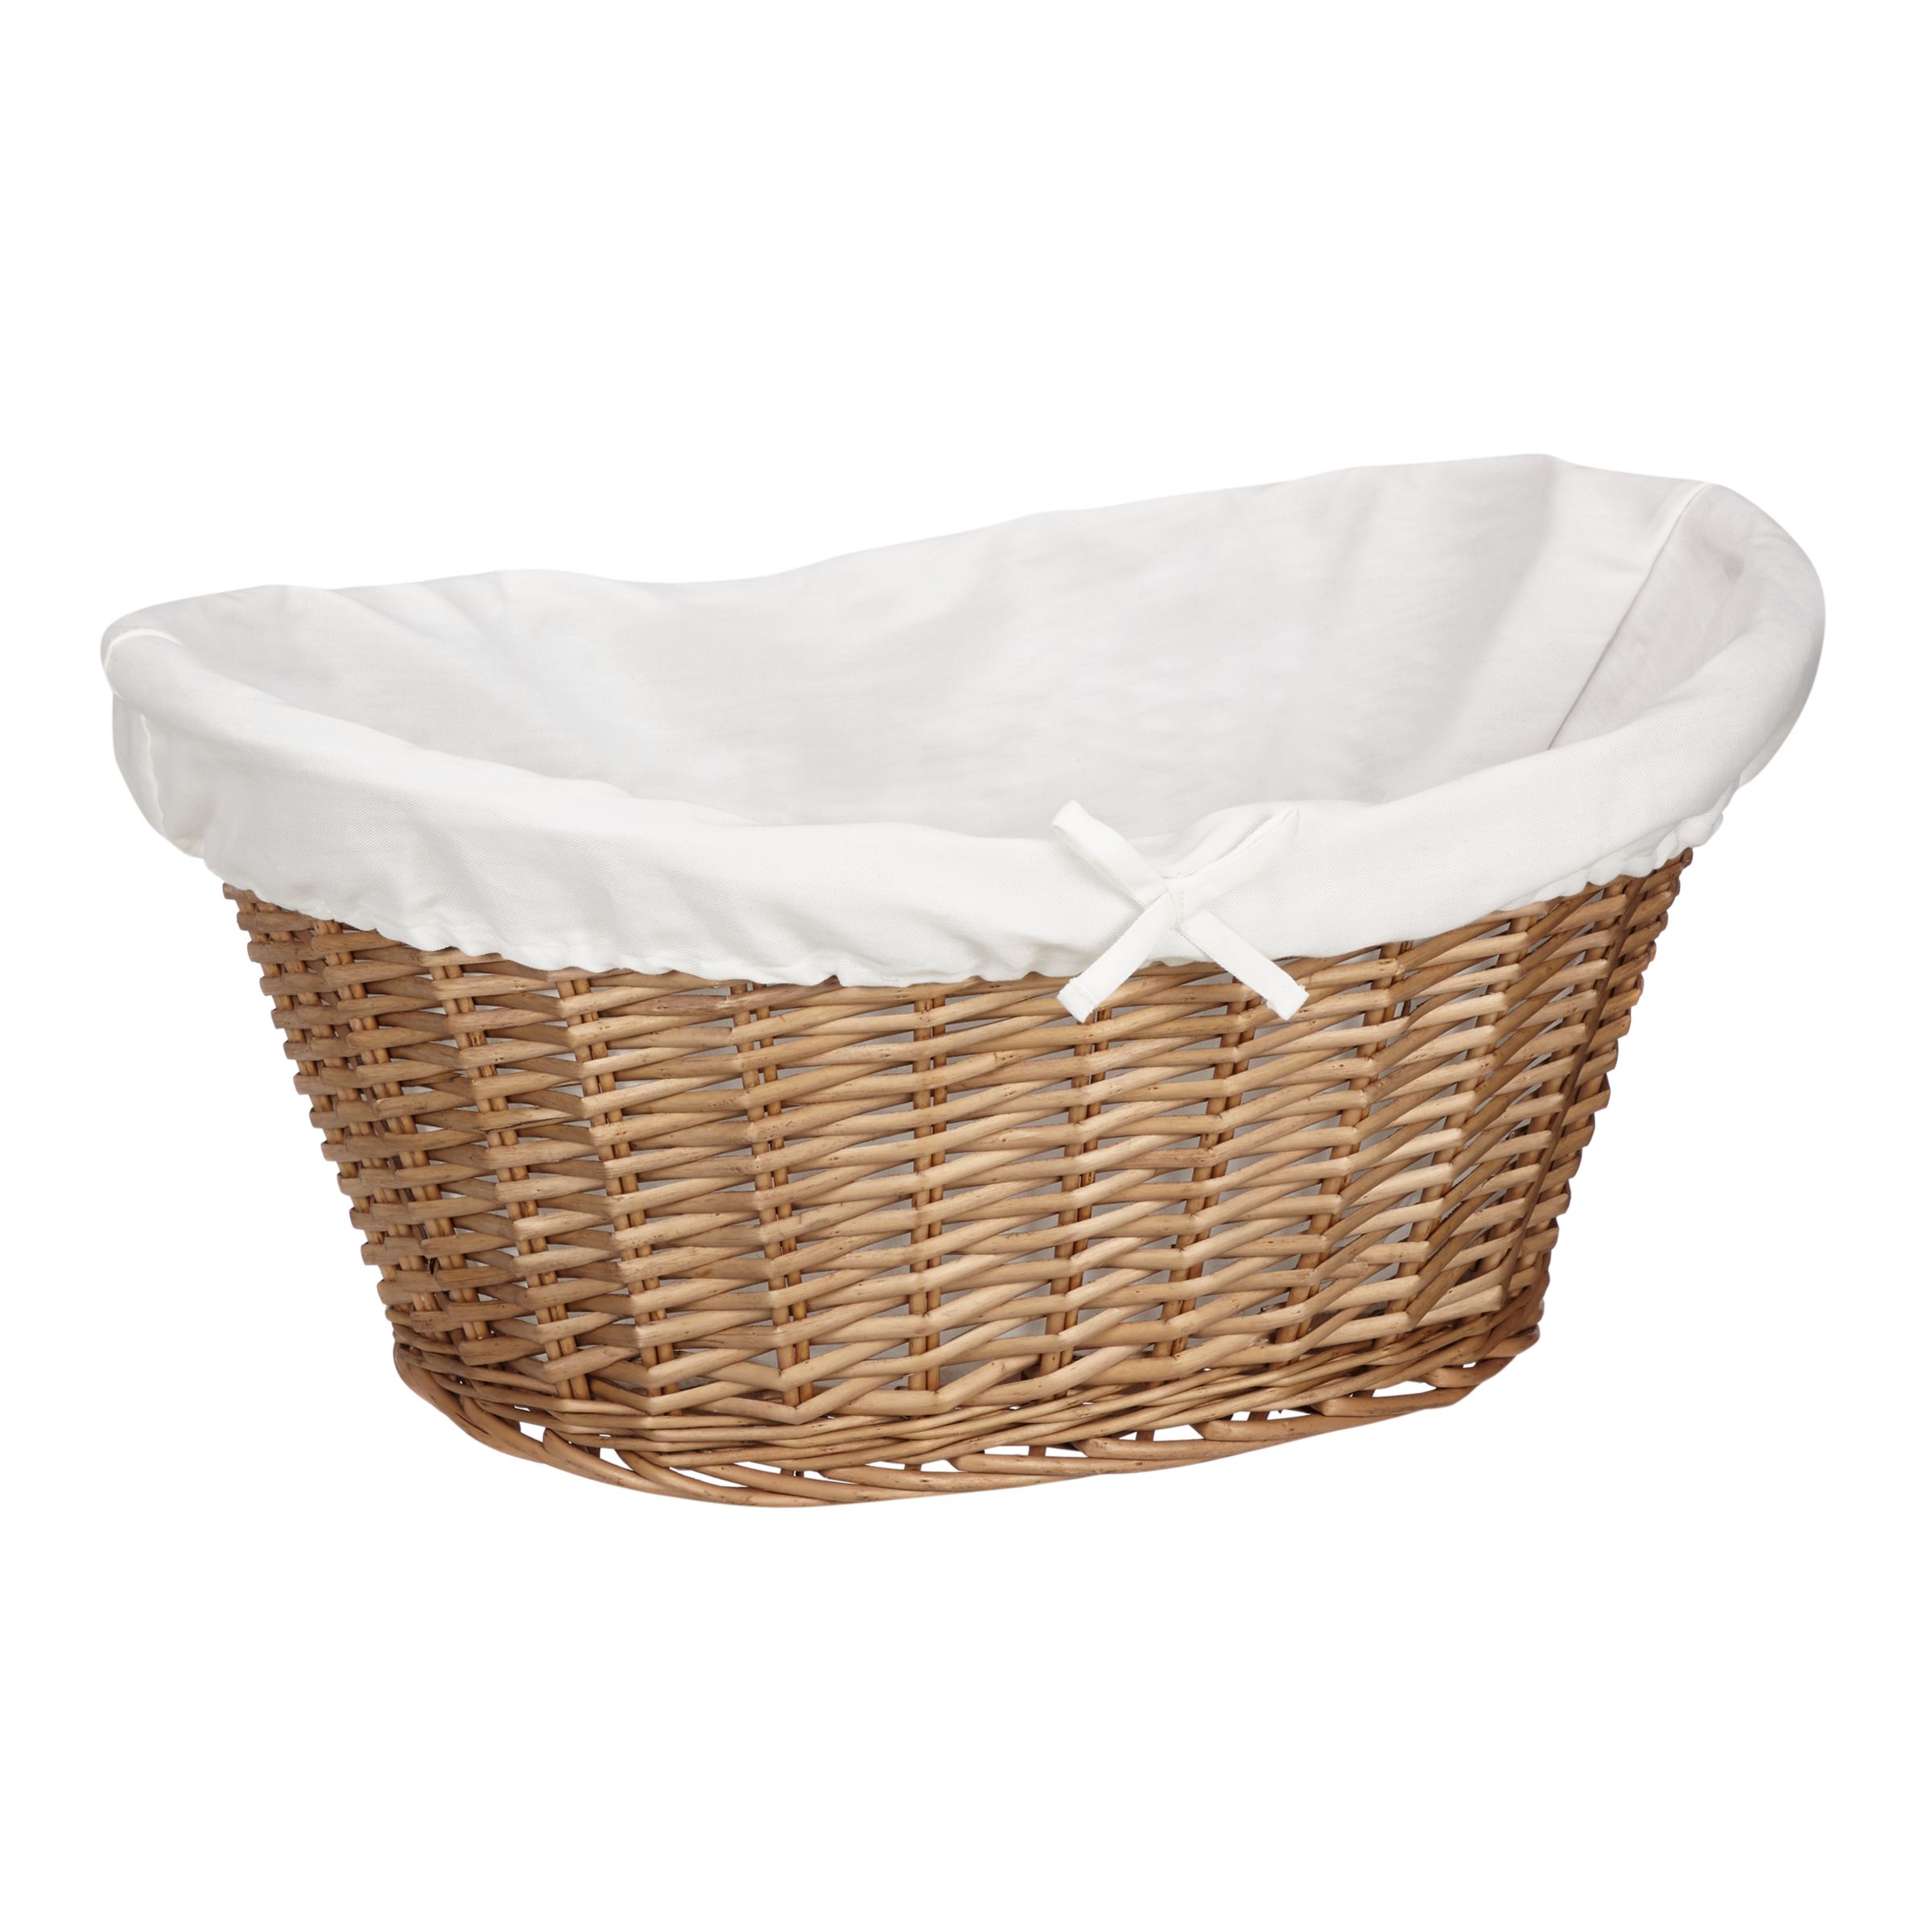 John Lewis Partners Lined Oval Wicker Laundry Basket At John Lewis Partners